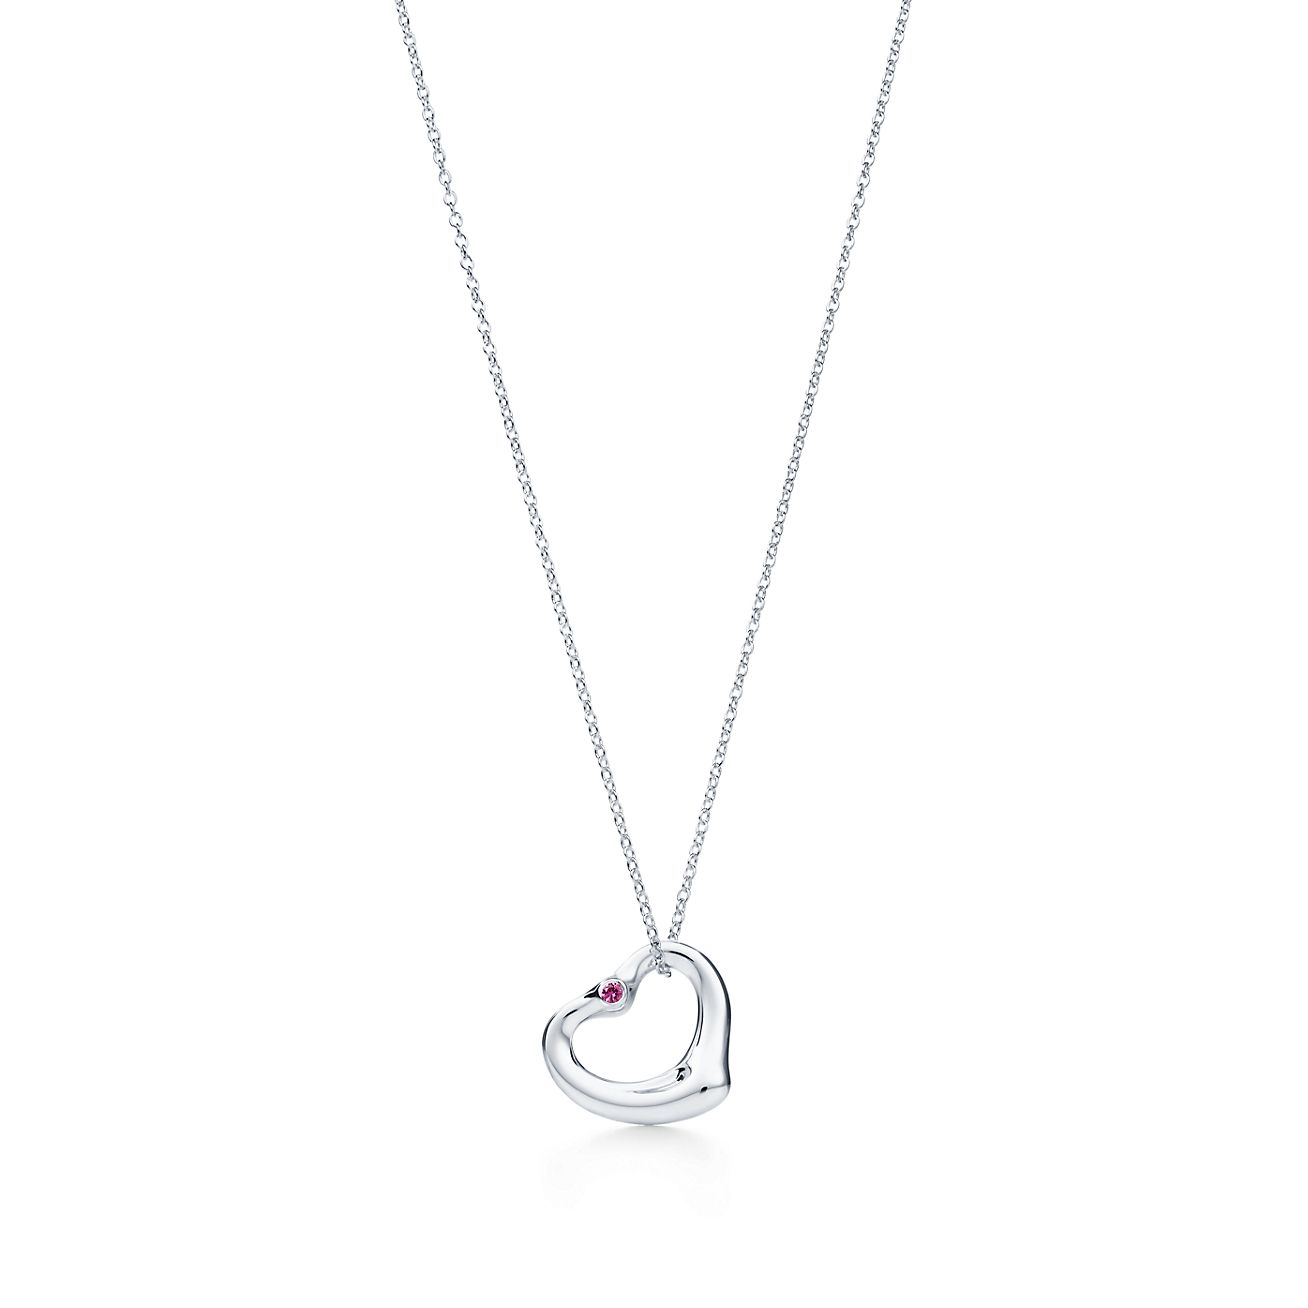 tiffany pink heart necklace